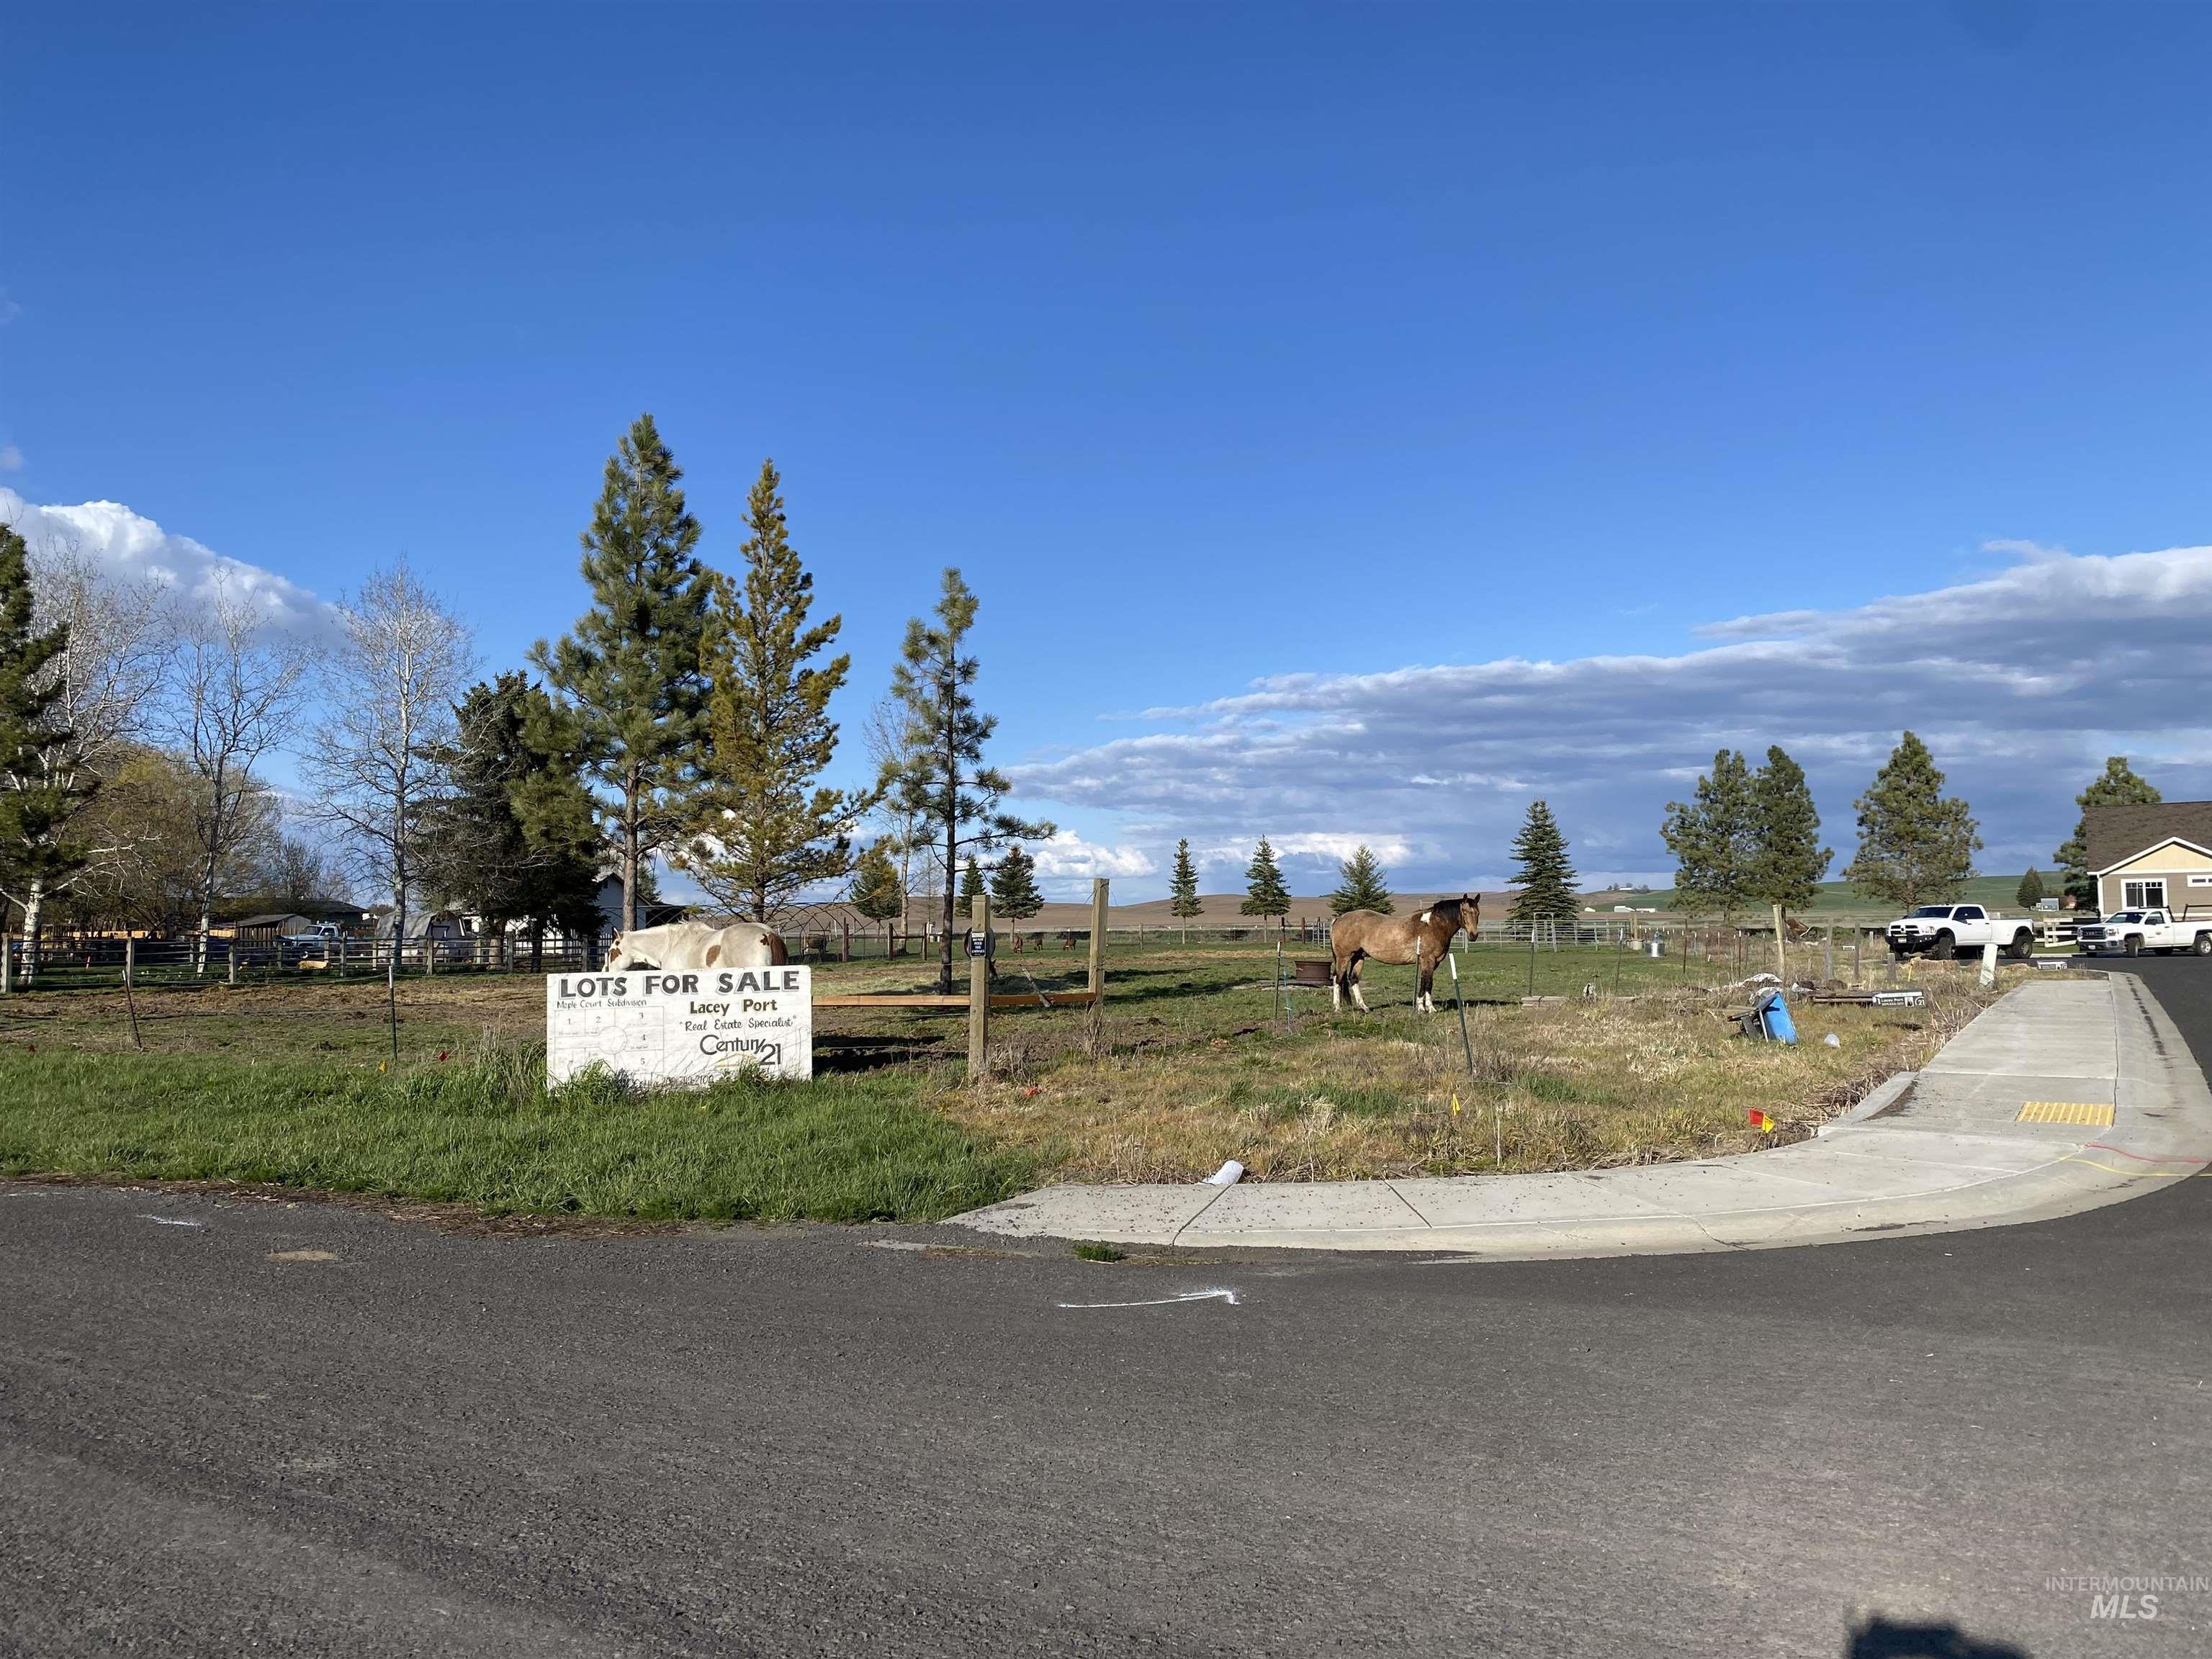 506 Maple Ct., Genesee, Idaho 83832, Land For Sale, Price $47,900,MLS 98906978